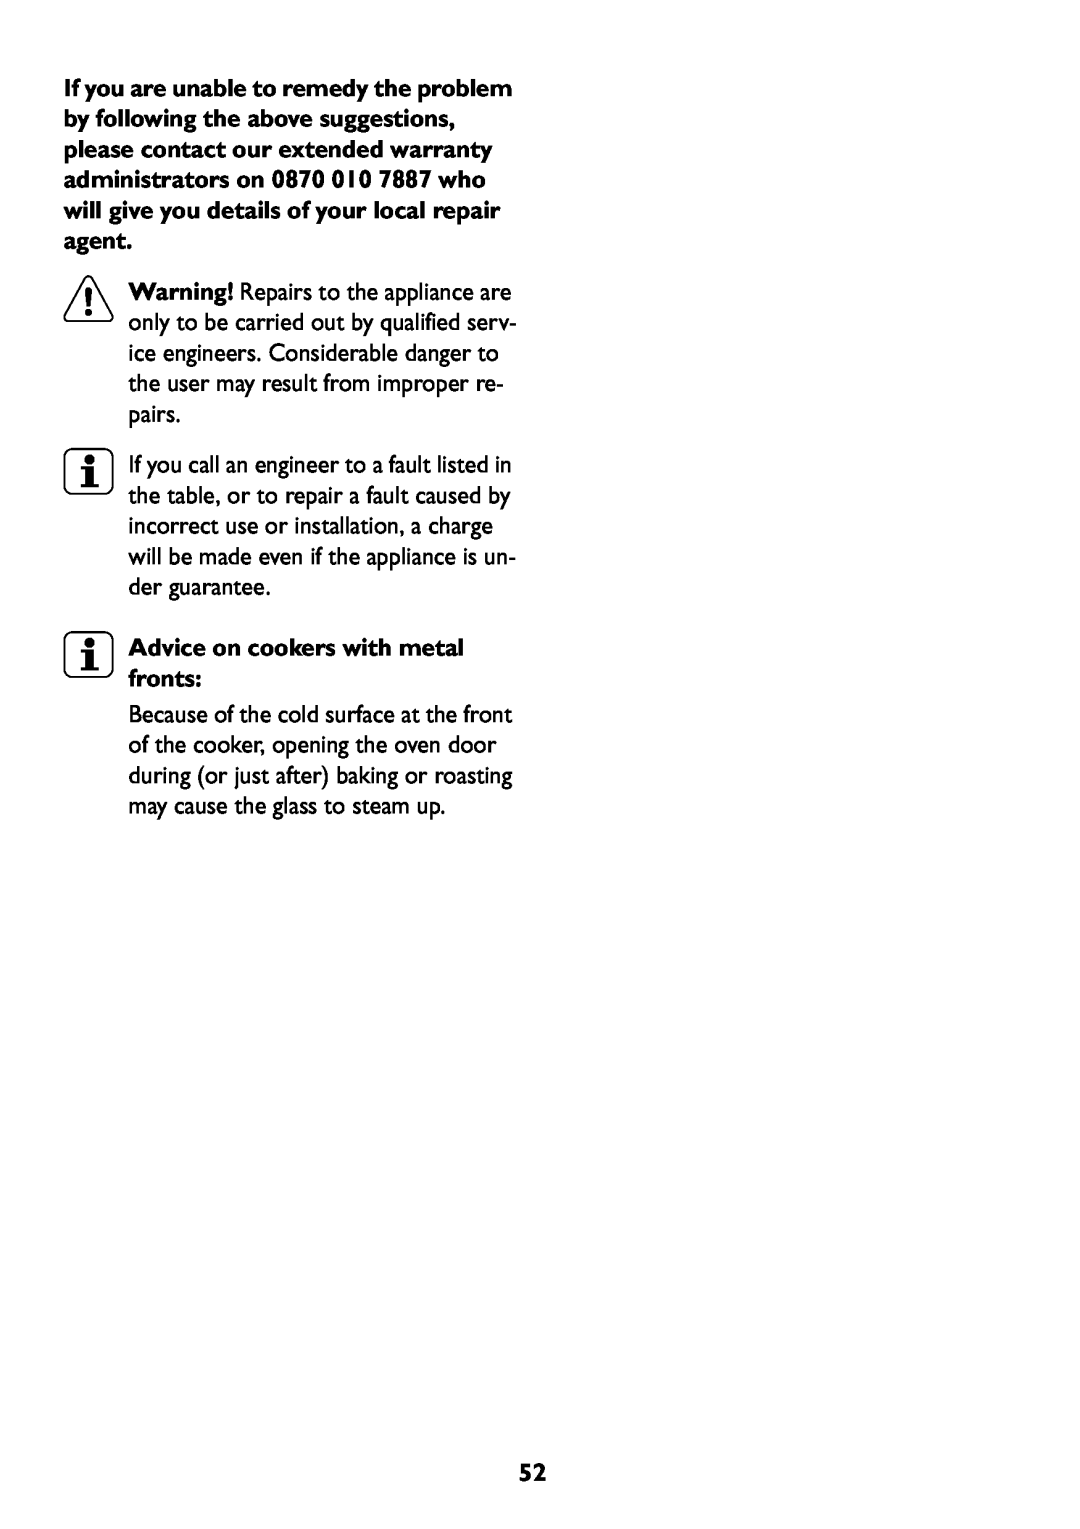 John Lewis JLBIOS609 manual 3Advice on cookers with metal fronts 